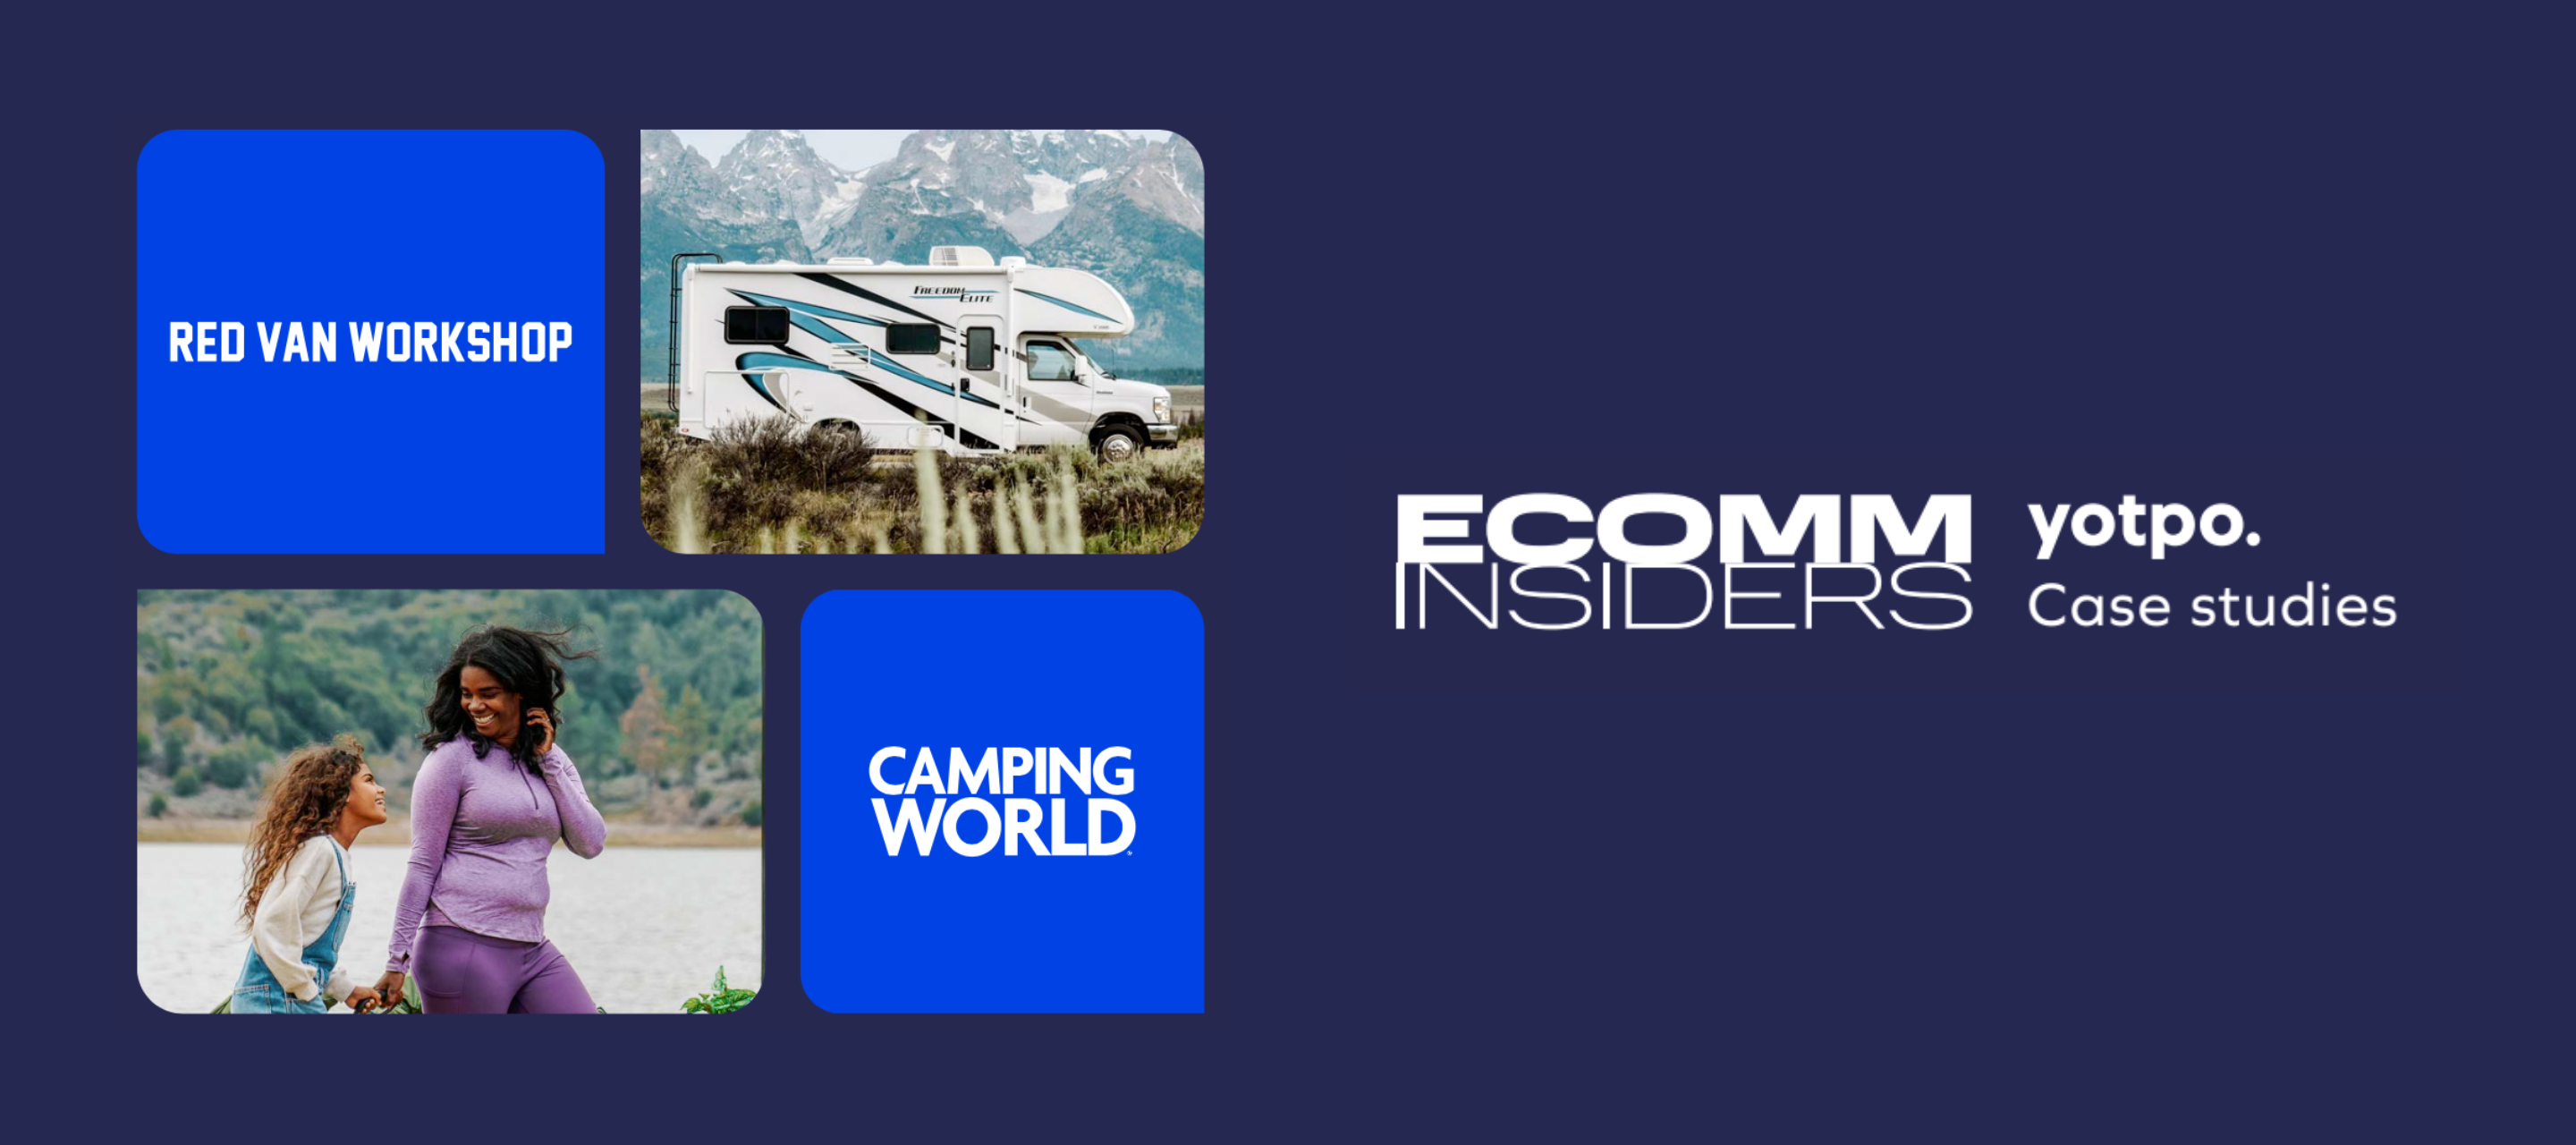 Mini Case Study | Red Van quickly launched Camping World sites using custom Yotpo solutions